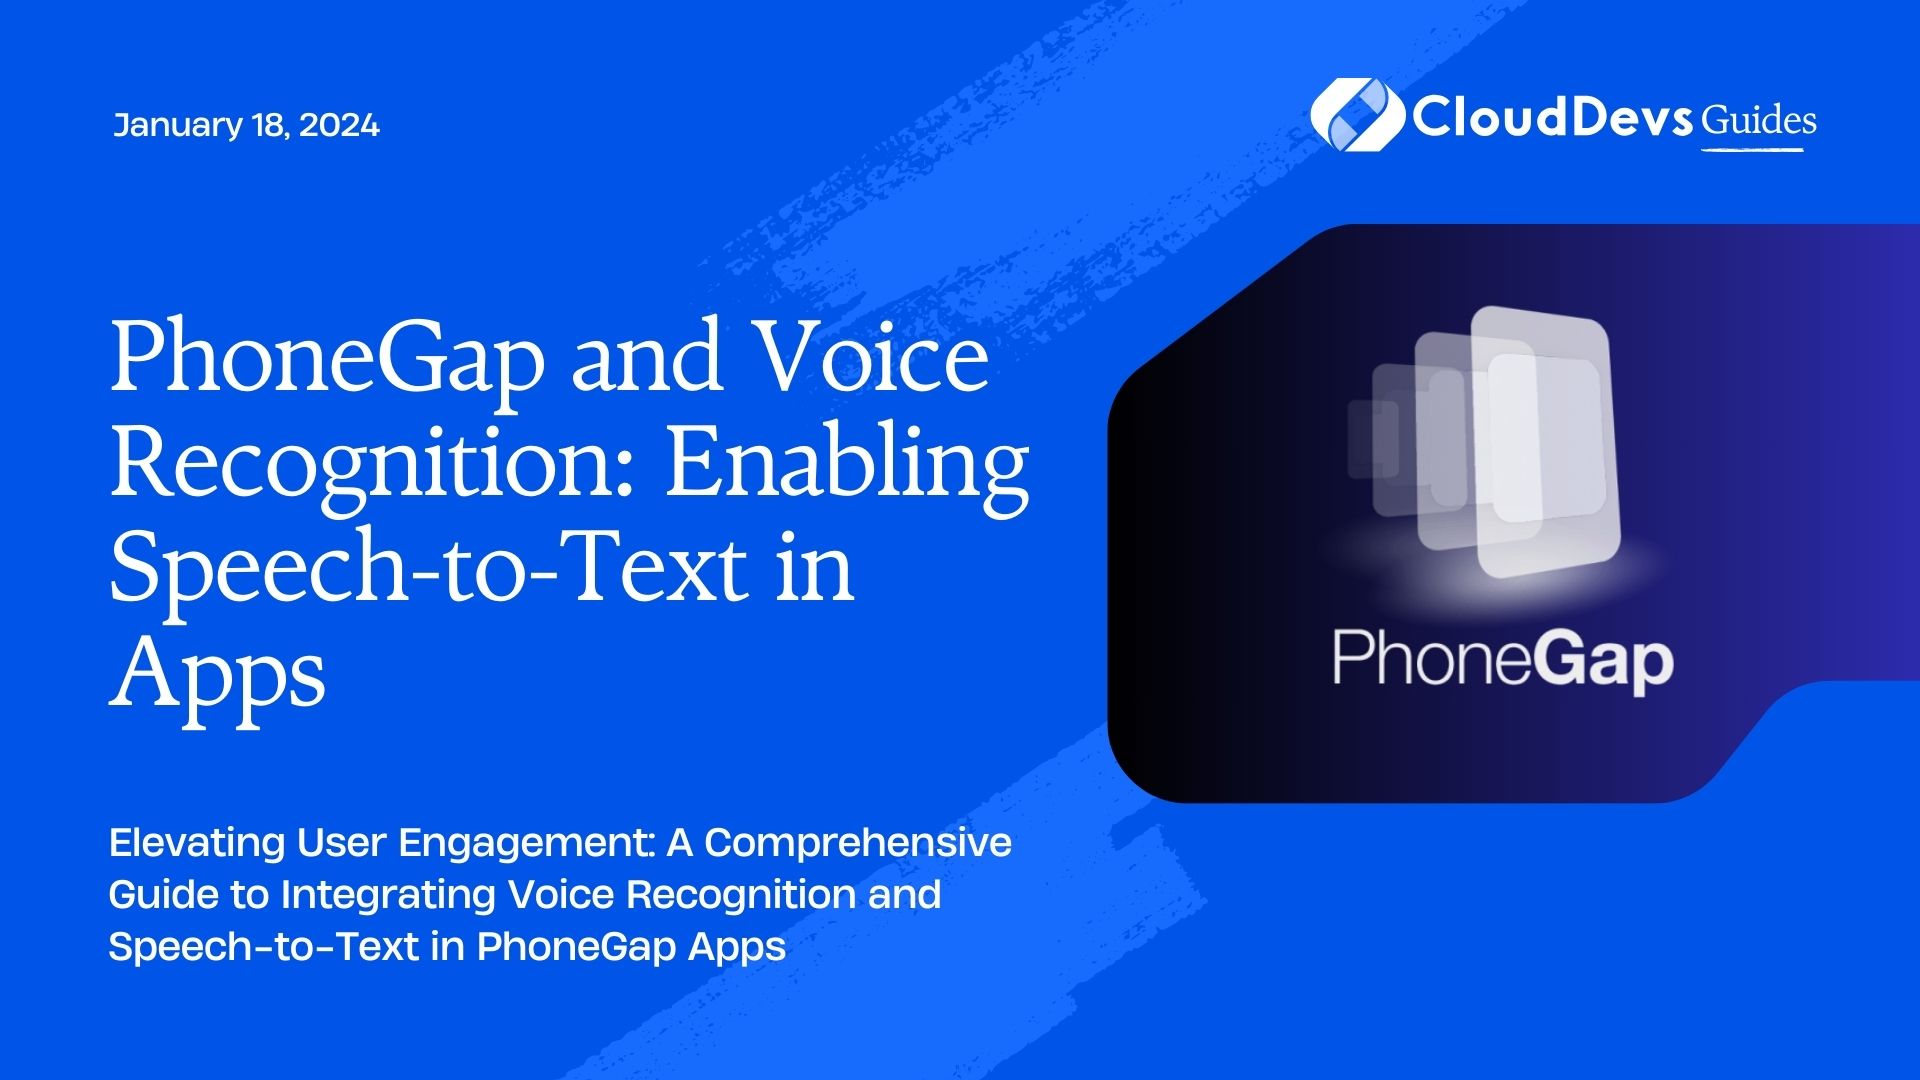 PhoneGap and Voice Recognition: Enabling Speech-to-Text in Apps